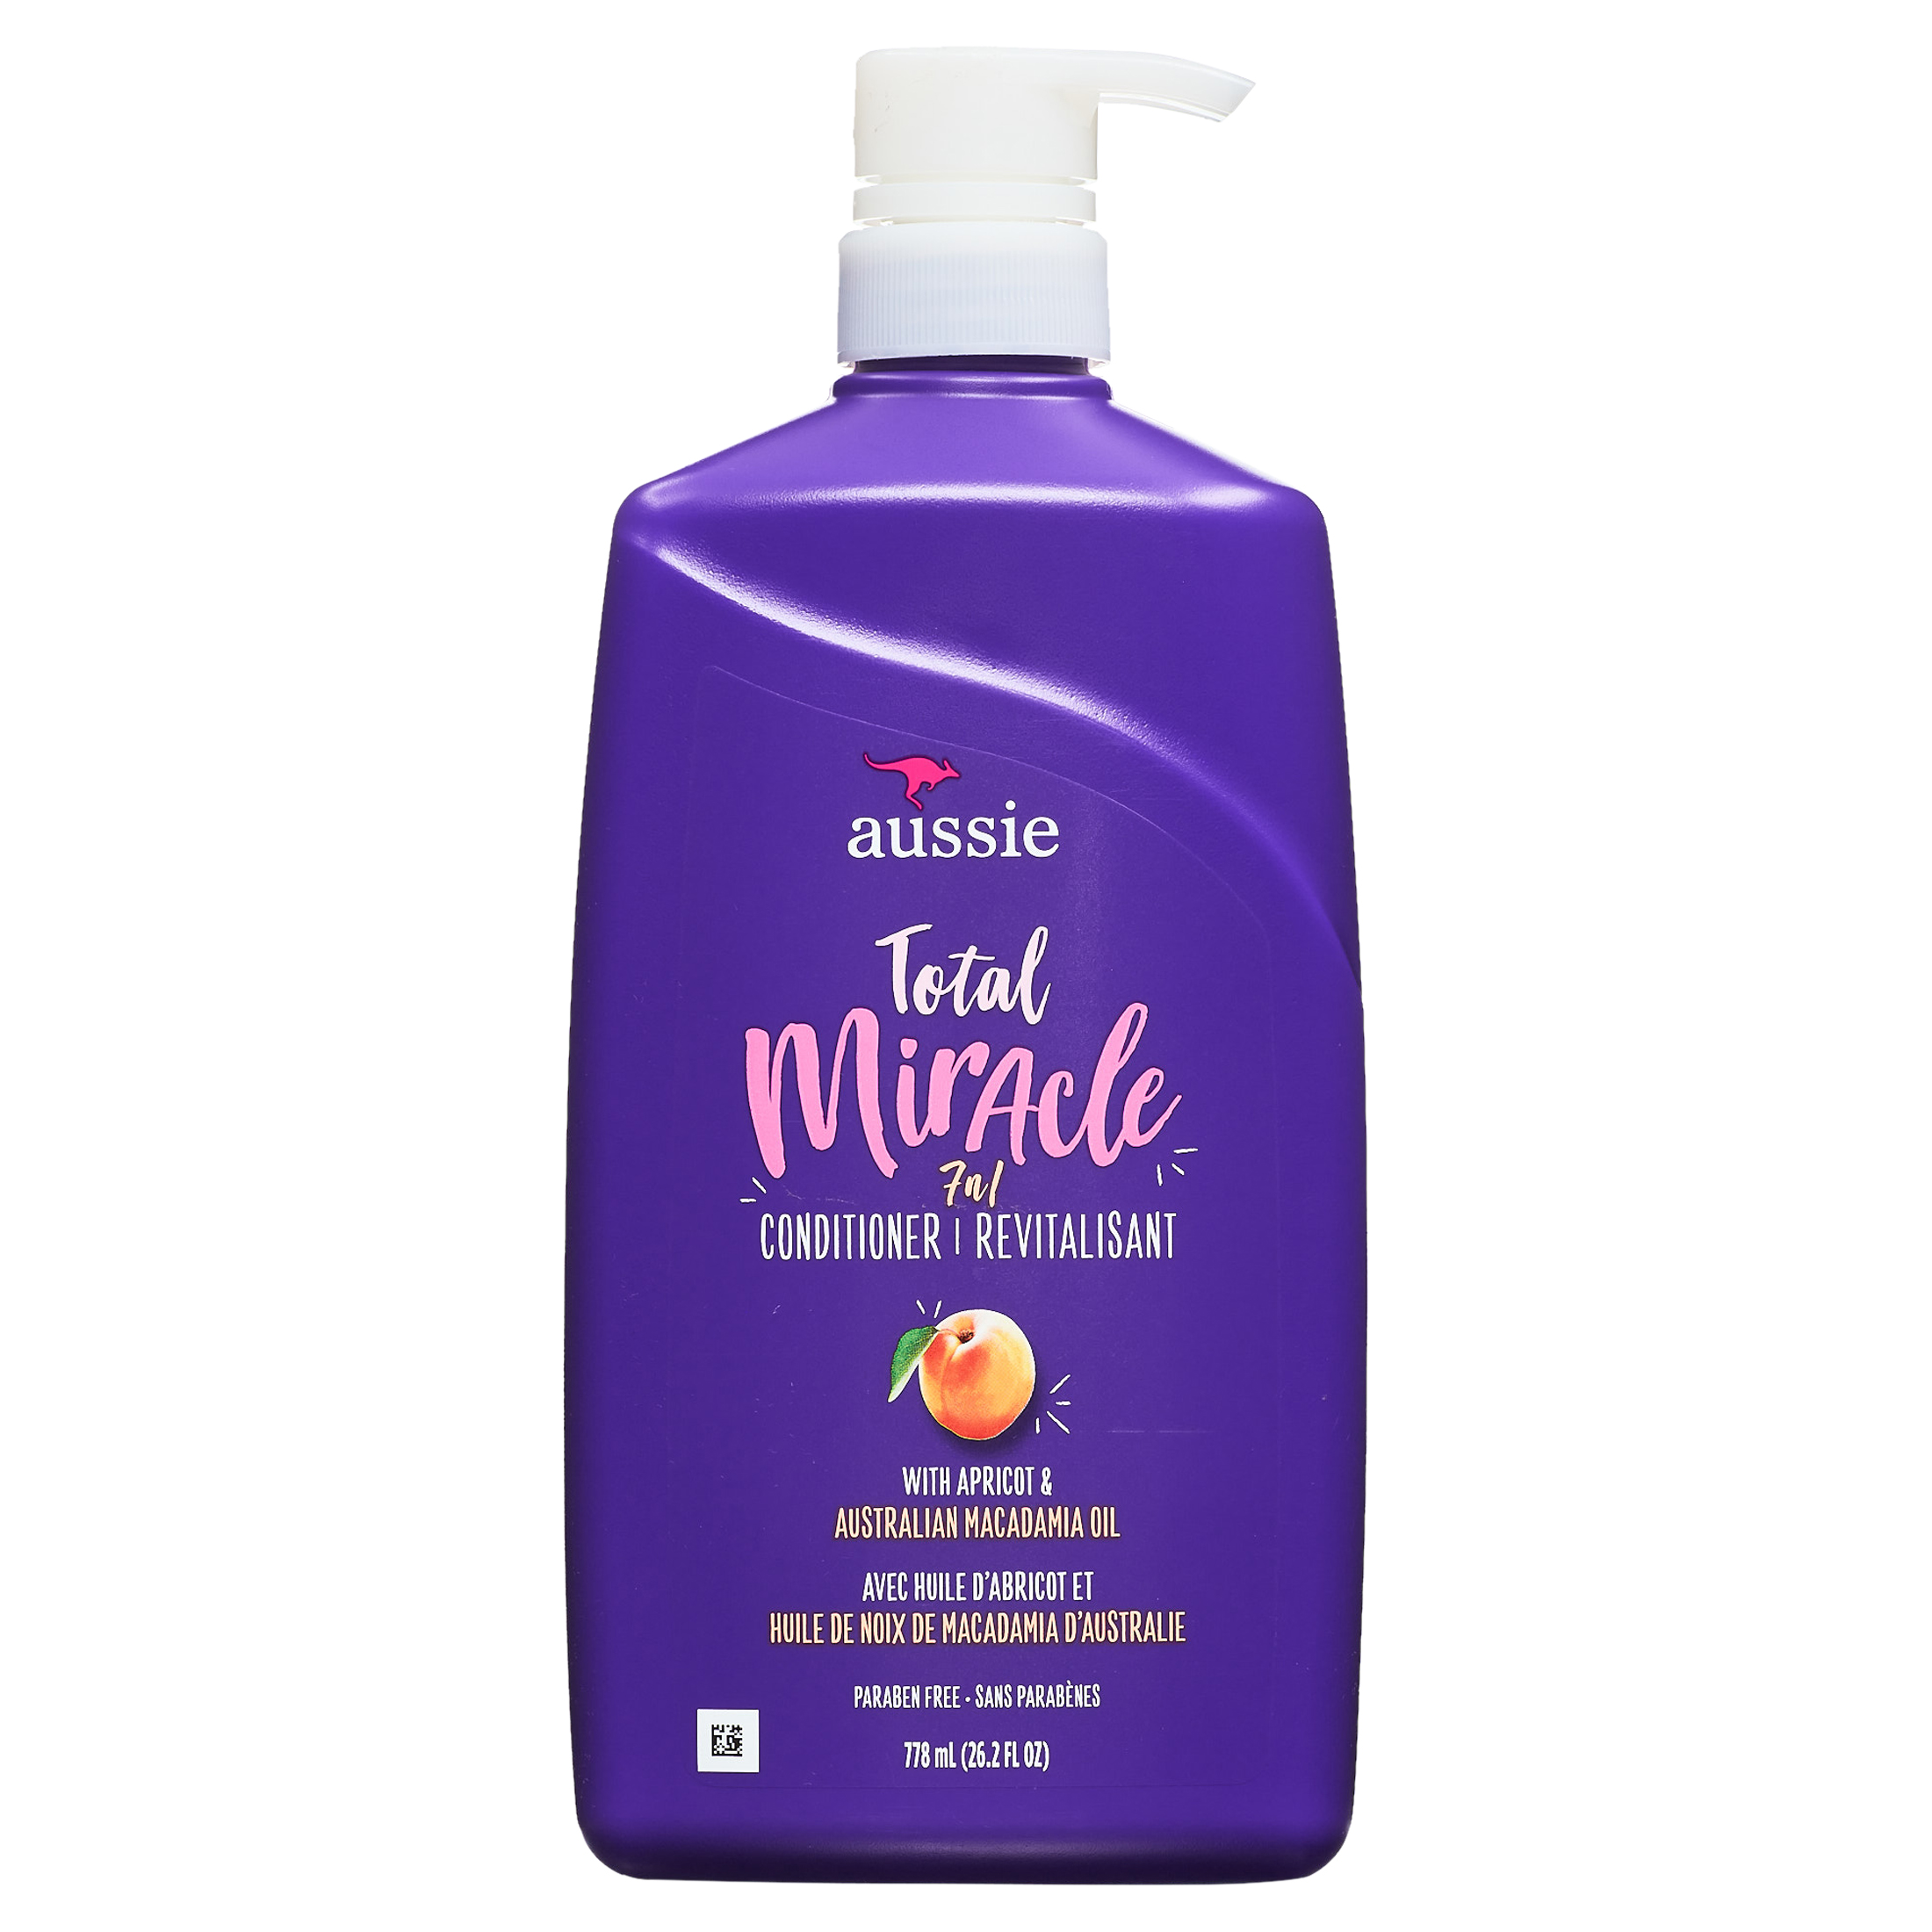 Aussie Total Miracle Conditioner, For Any Hair Type, Paraben Free, 26.2 fl oz - image 1 of 10